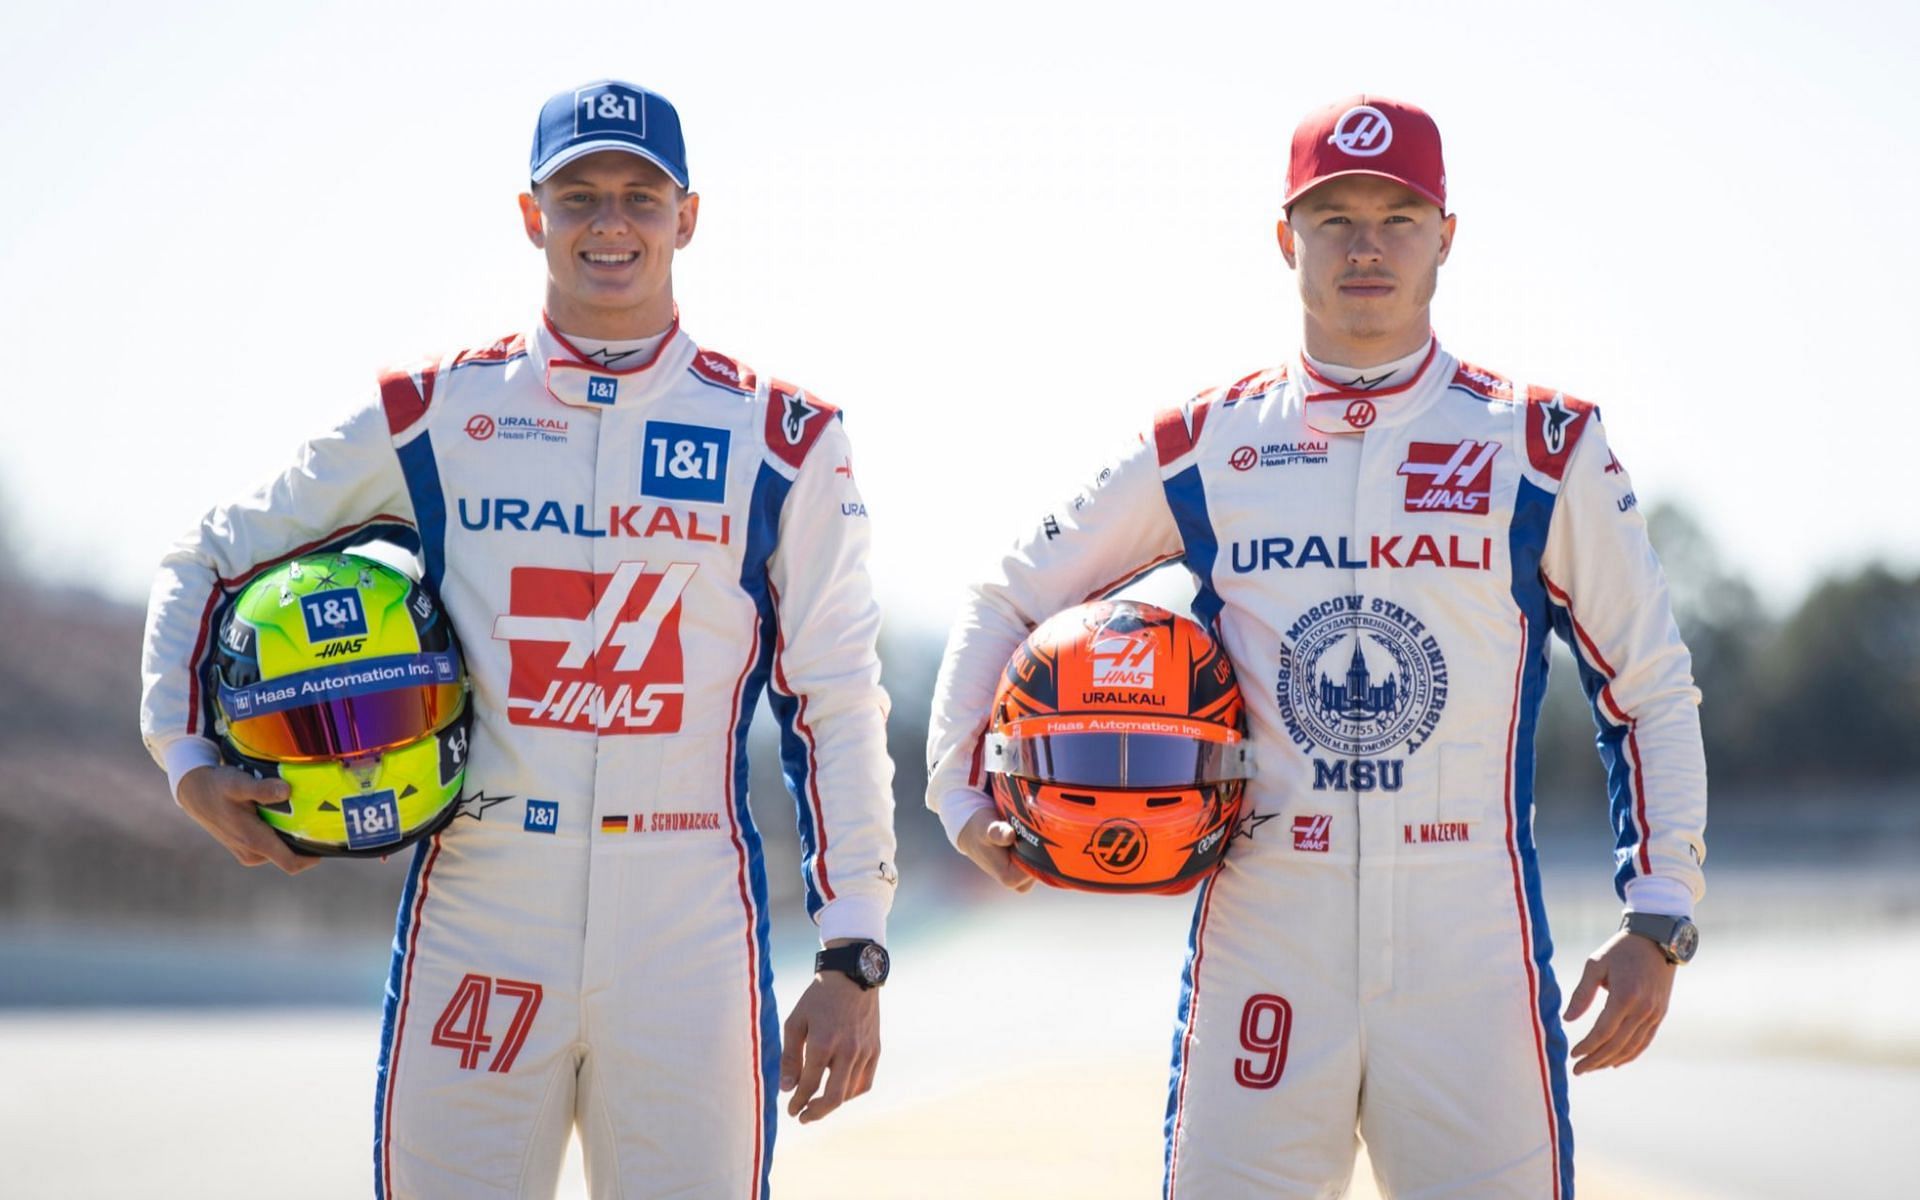 Mick Schumacher (left) and Nikita Mazepin (right) made their F1 debuts with Haas last season